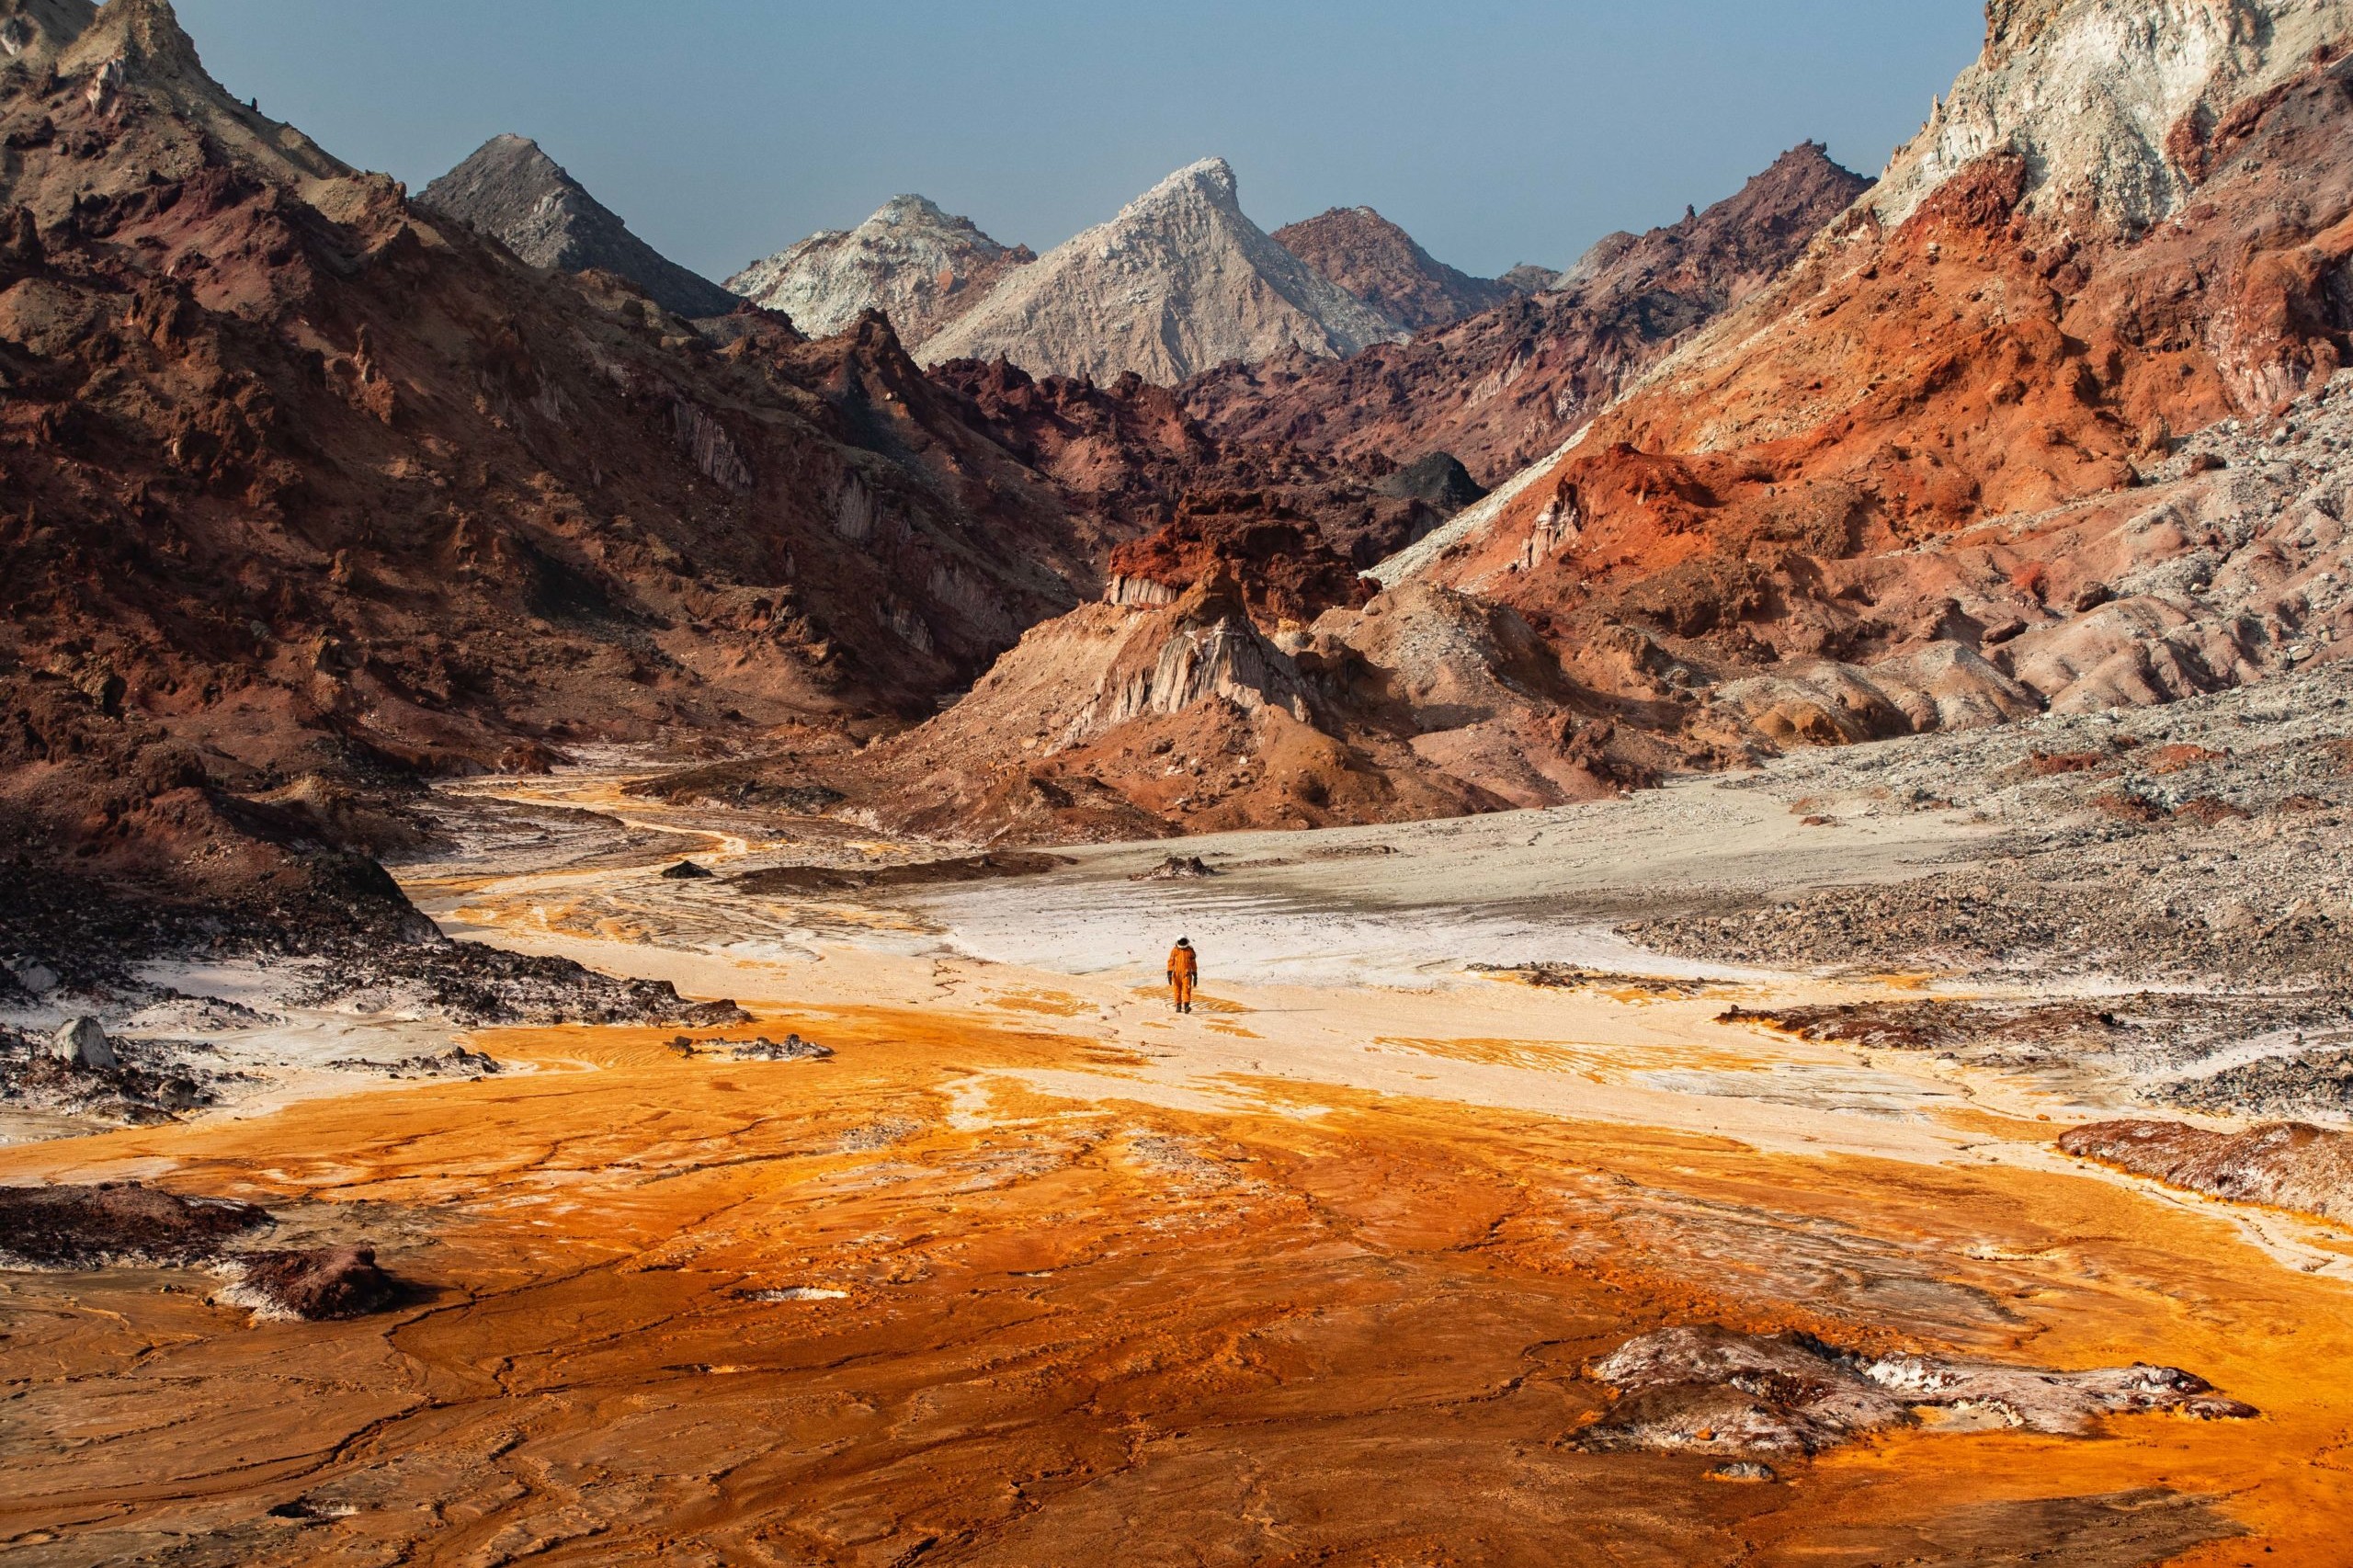 Landscape photography of an astronaut exploring the otherworldly landscape of a salt river in southern Iran